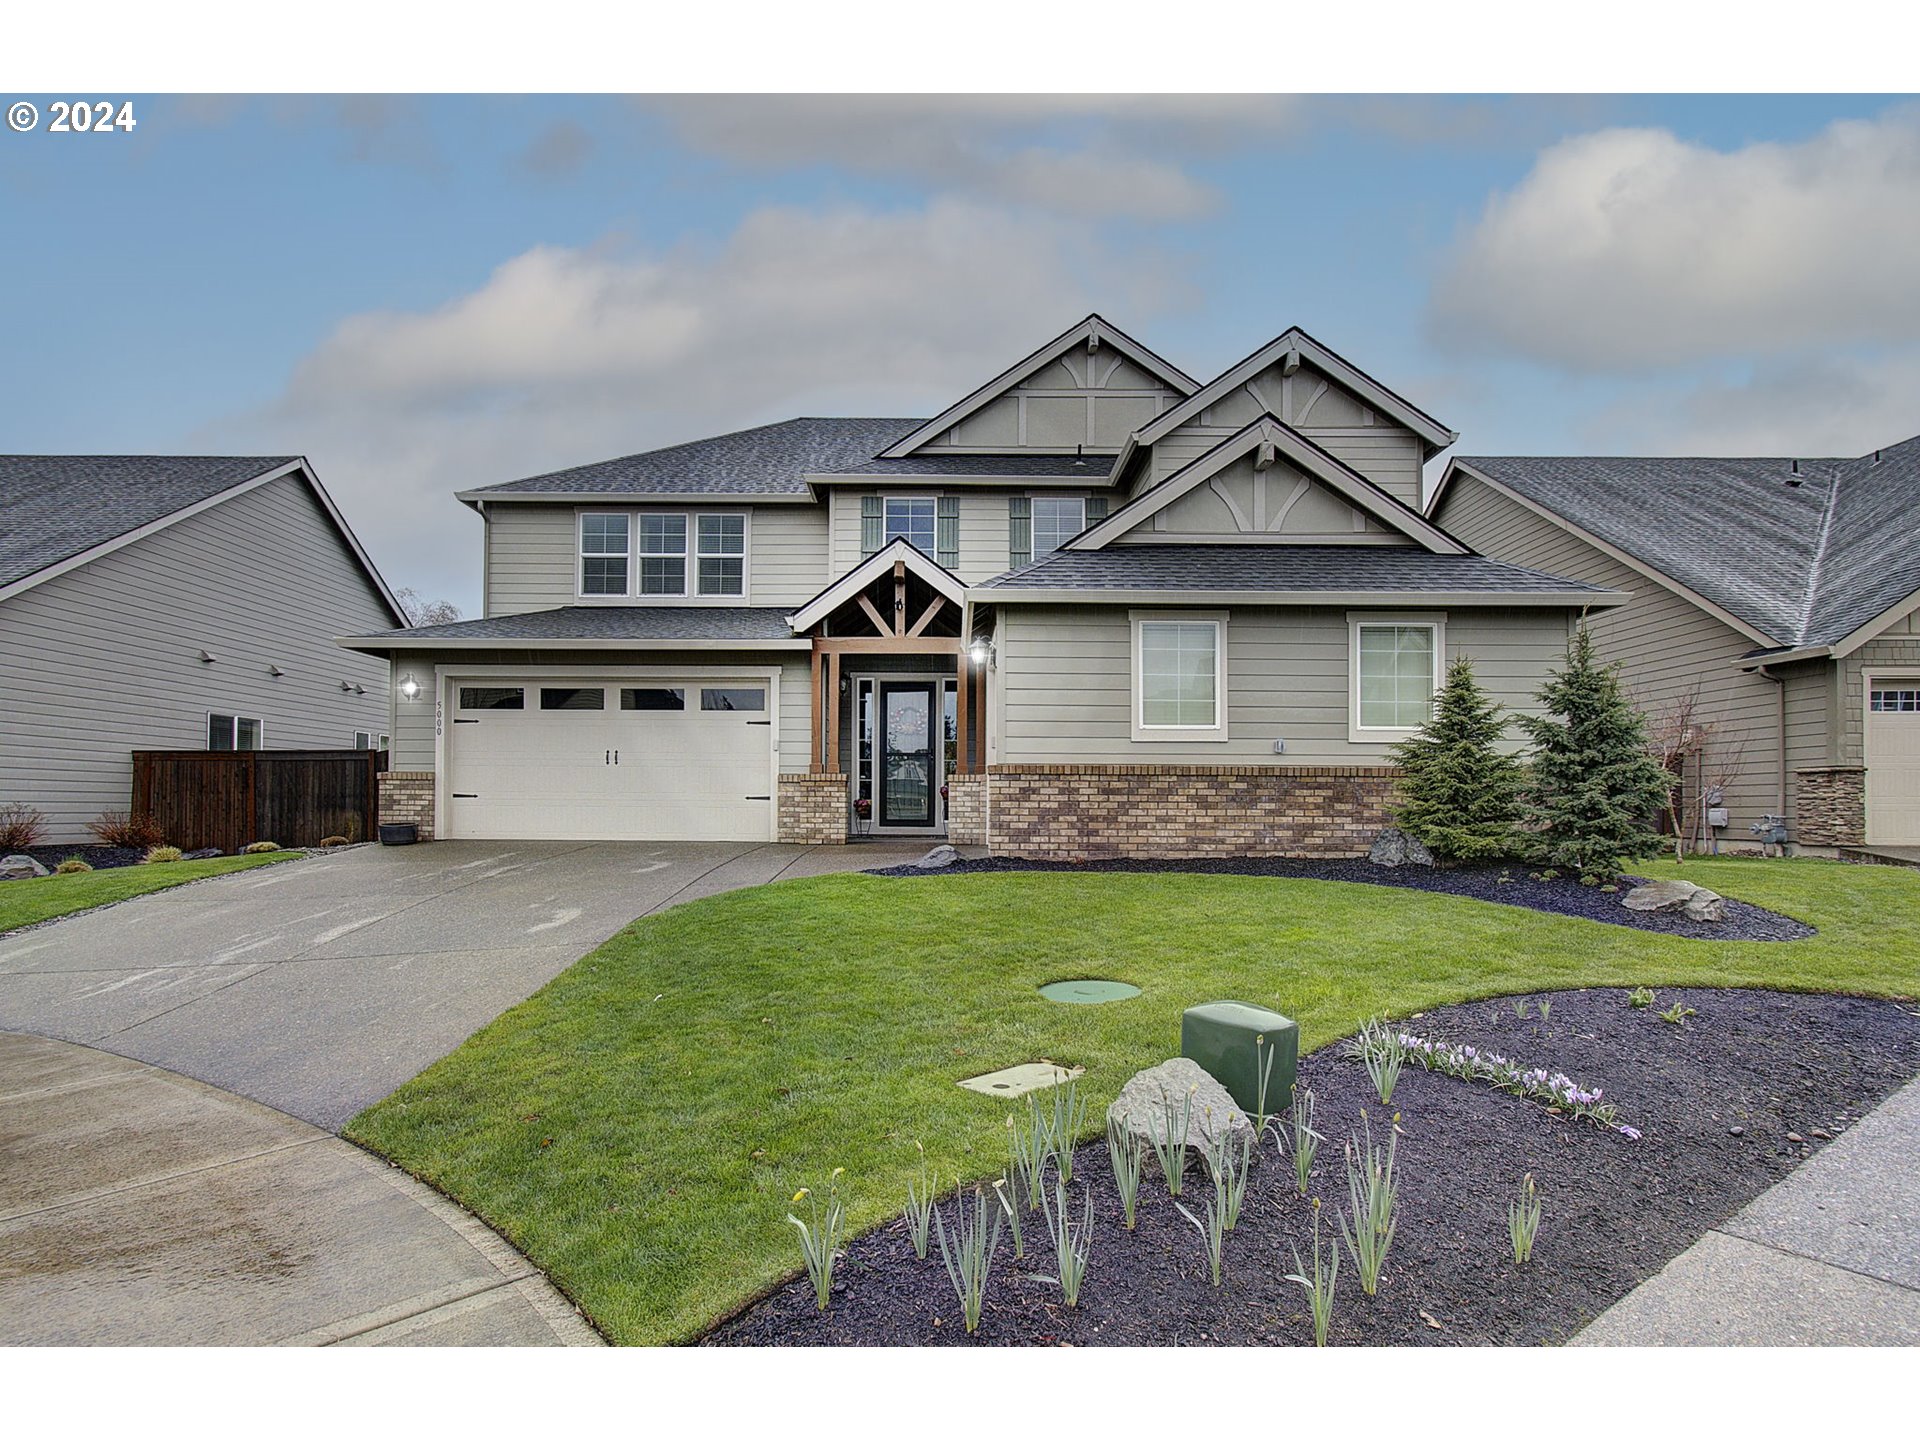 5000 NW 138TH ST, Vancouver, WA 